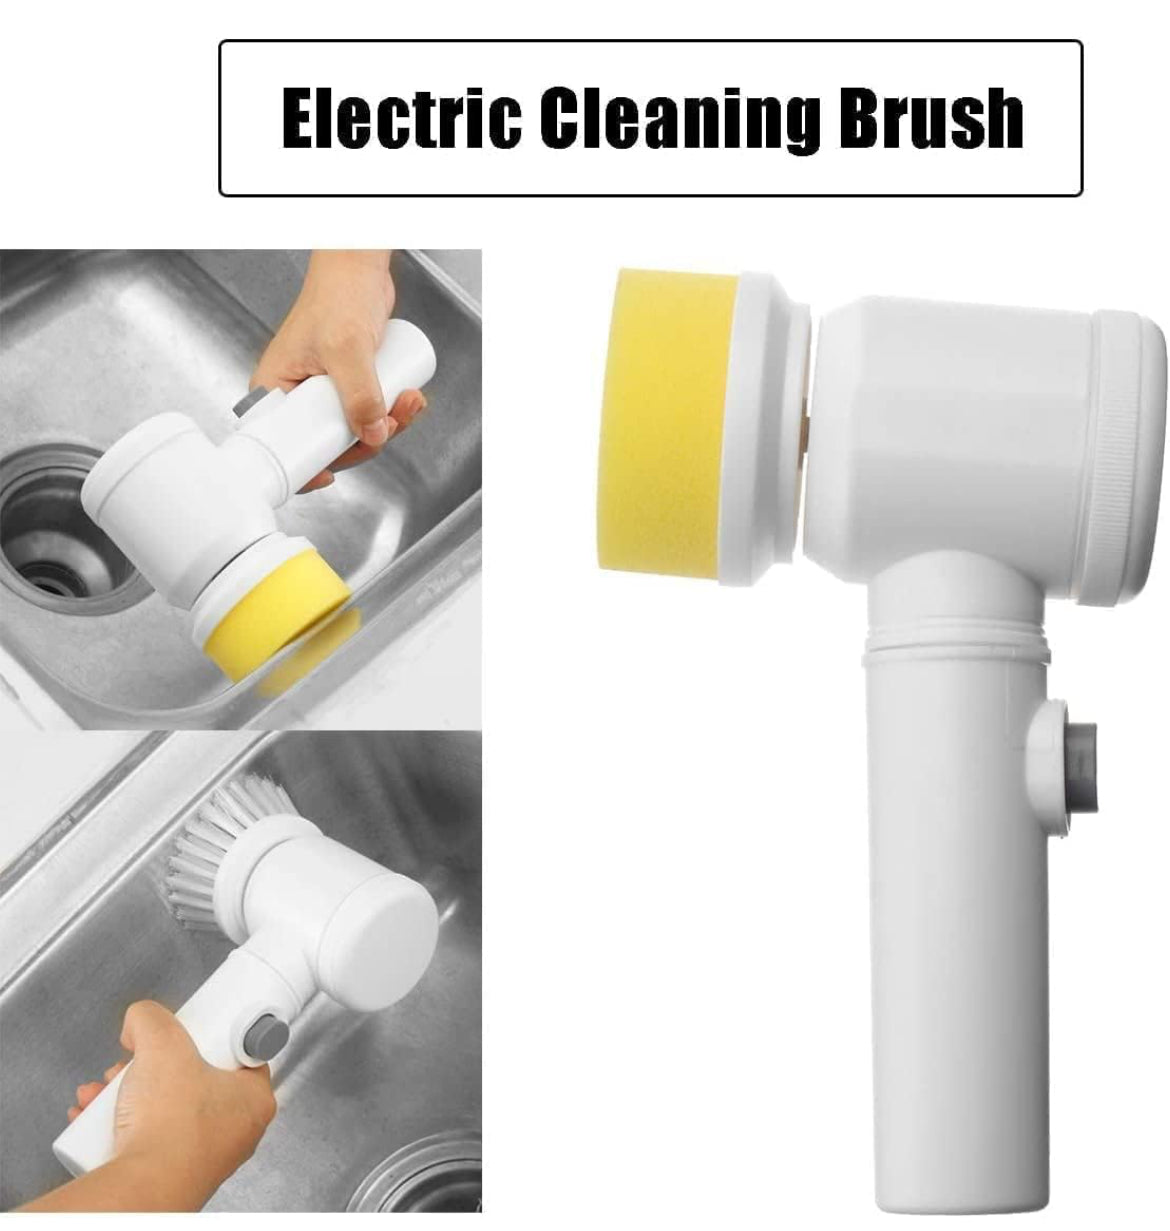 5 in 1 electric cleaning Brush for kitchen